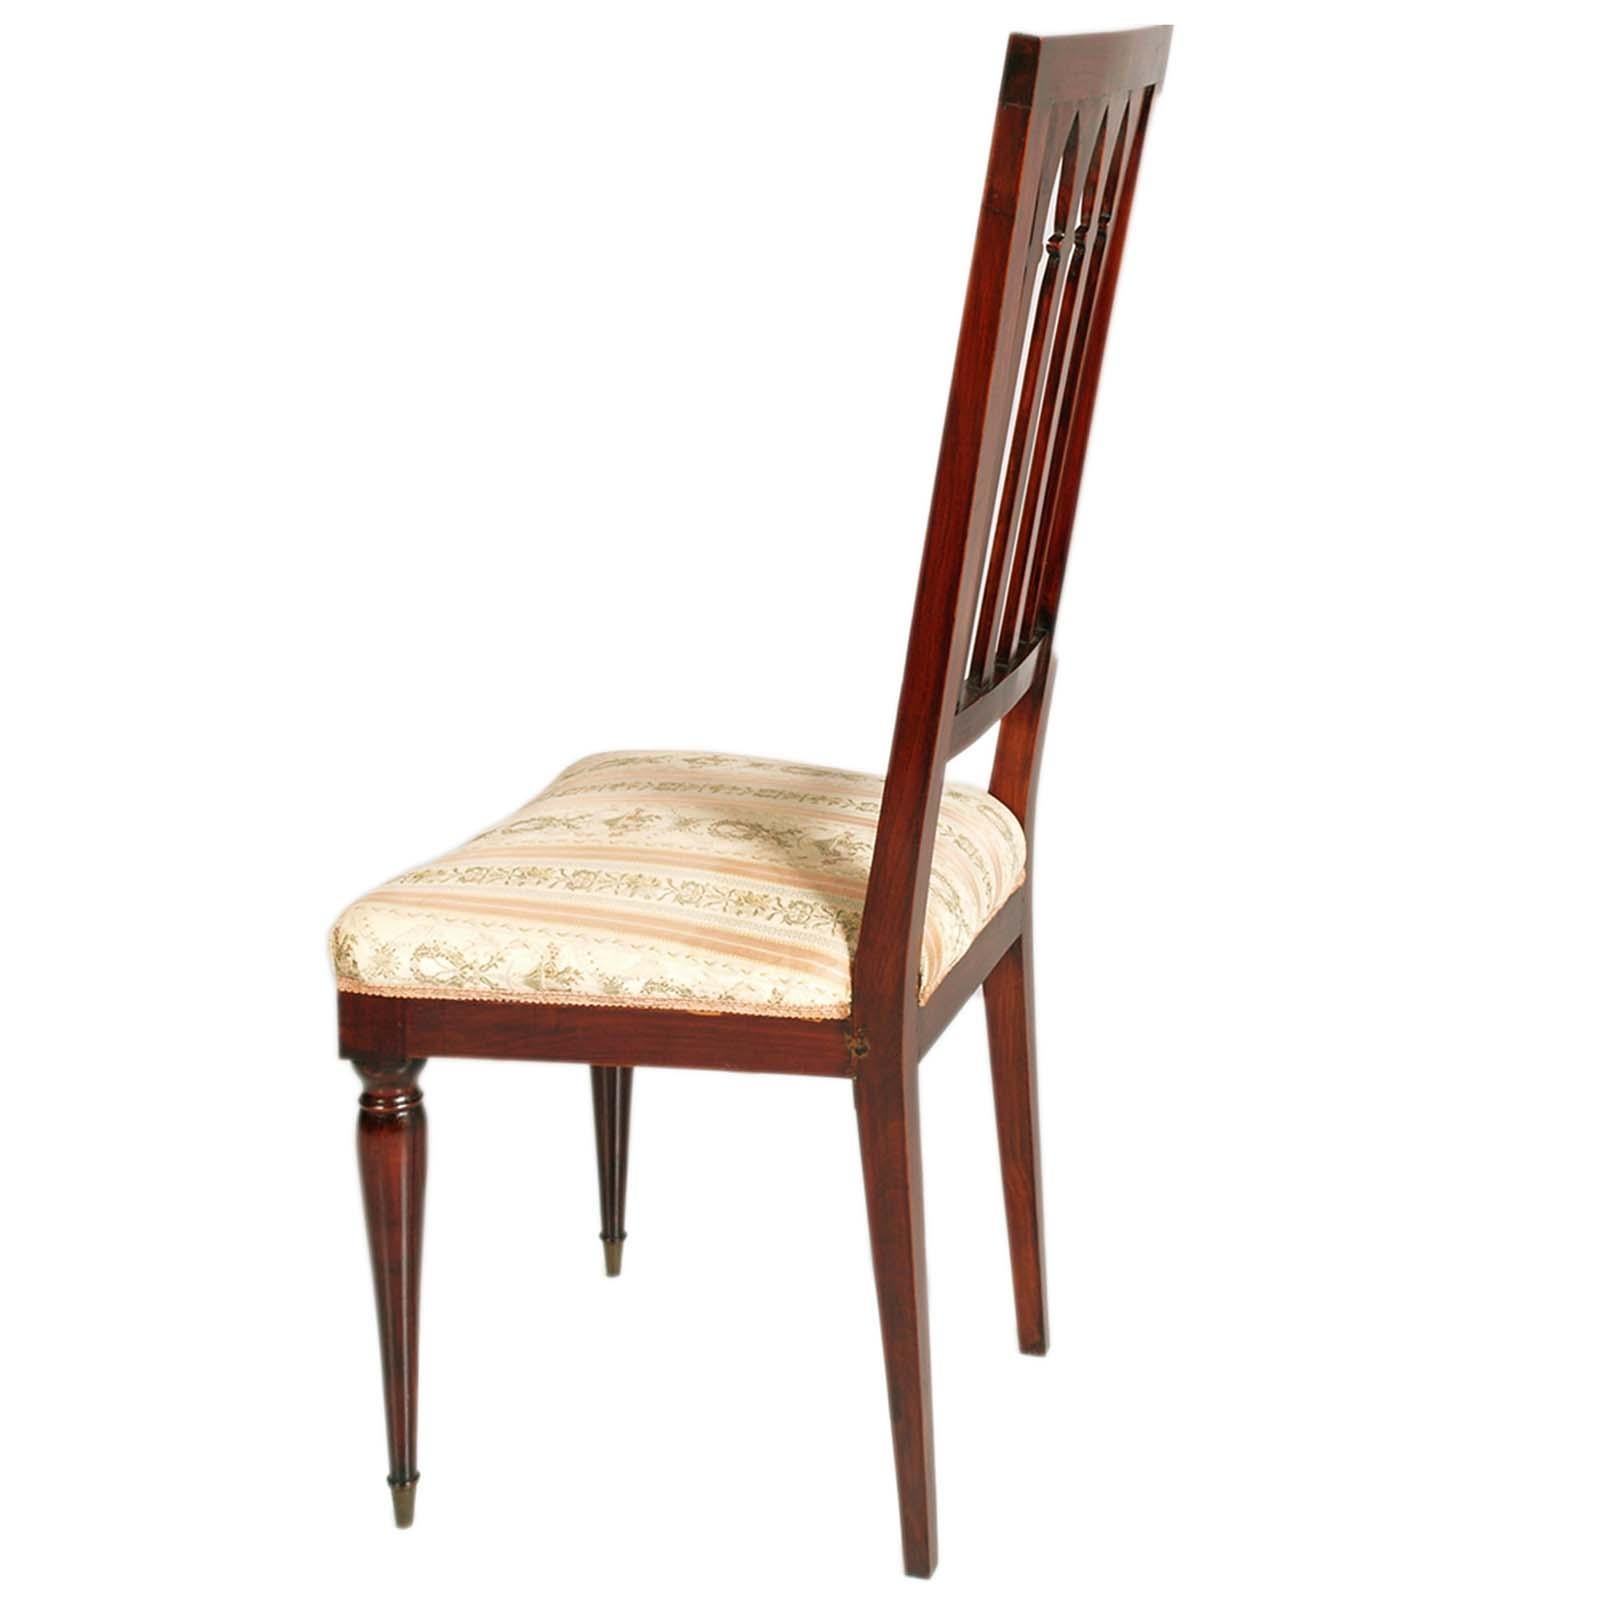 Eight French Gothic Style Chairs , Mahogany 1940s , Charles Dudouyt attributed In Good Condition For Sale In Vigonza, Padua